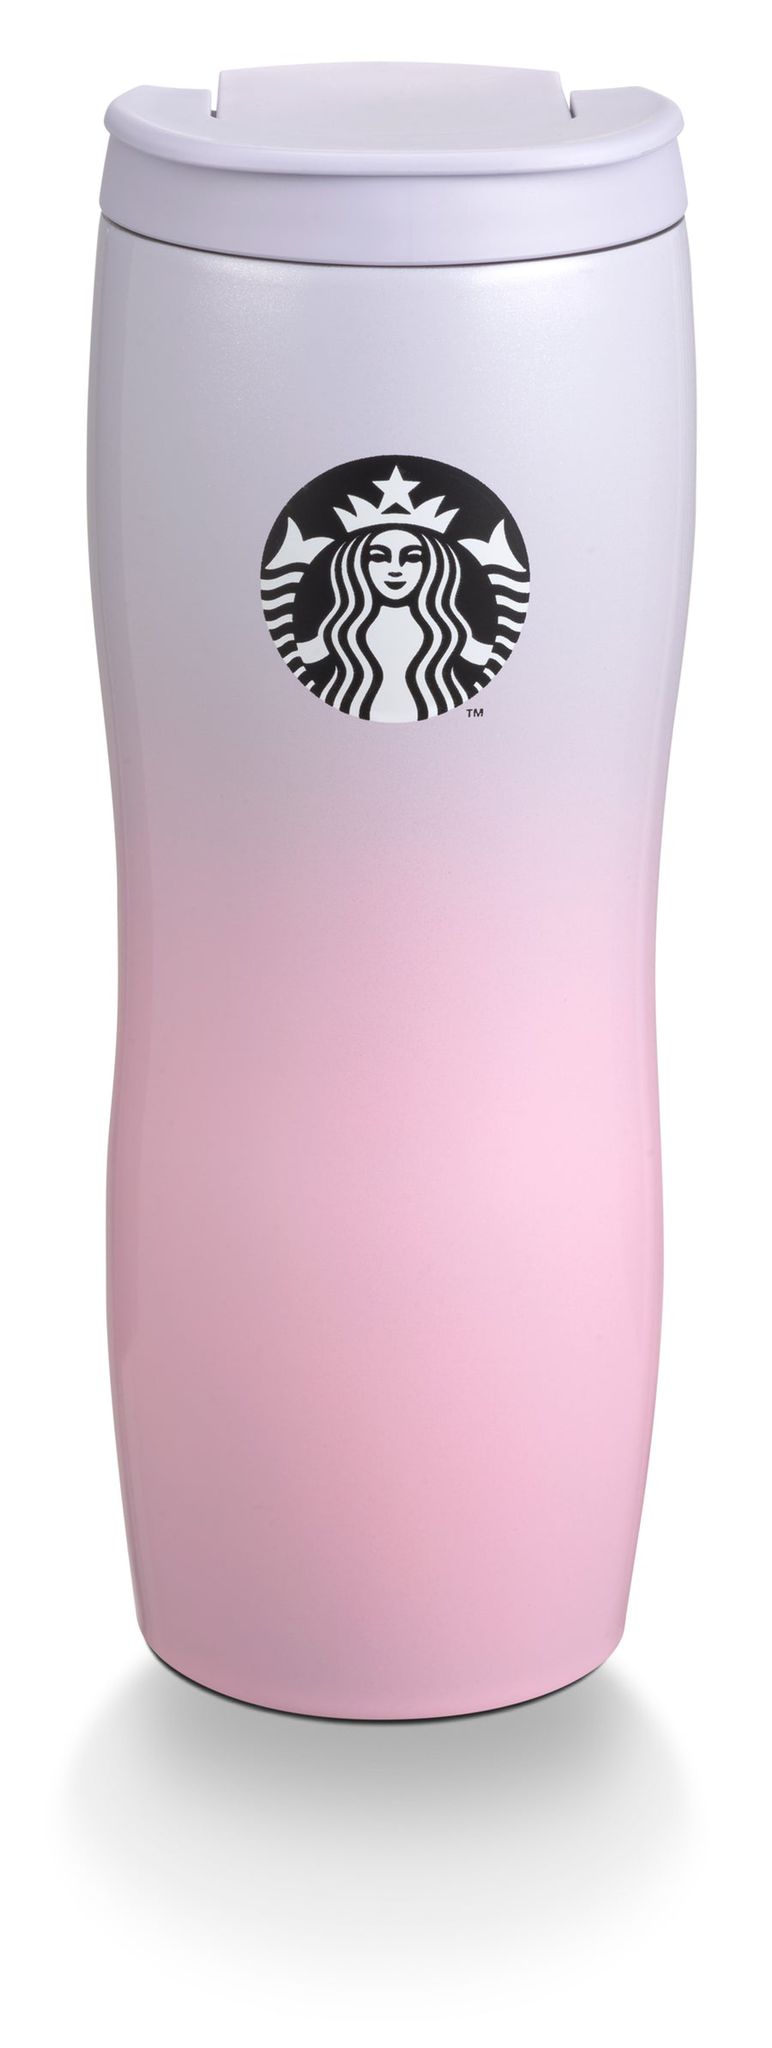 HURRY! Disneyland's Studded Starbucks Tumbler is Now Available Online! 